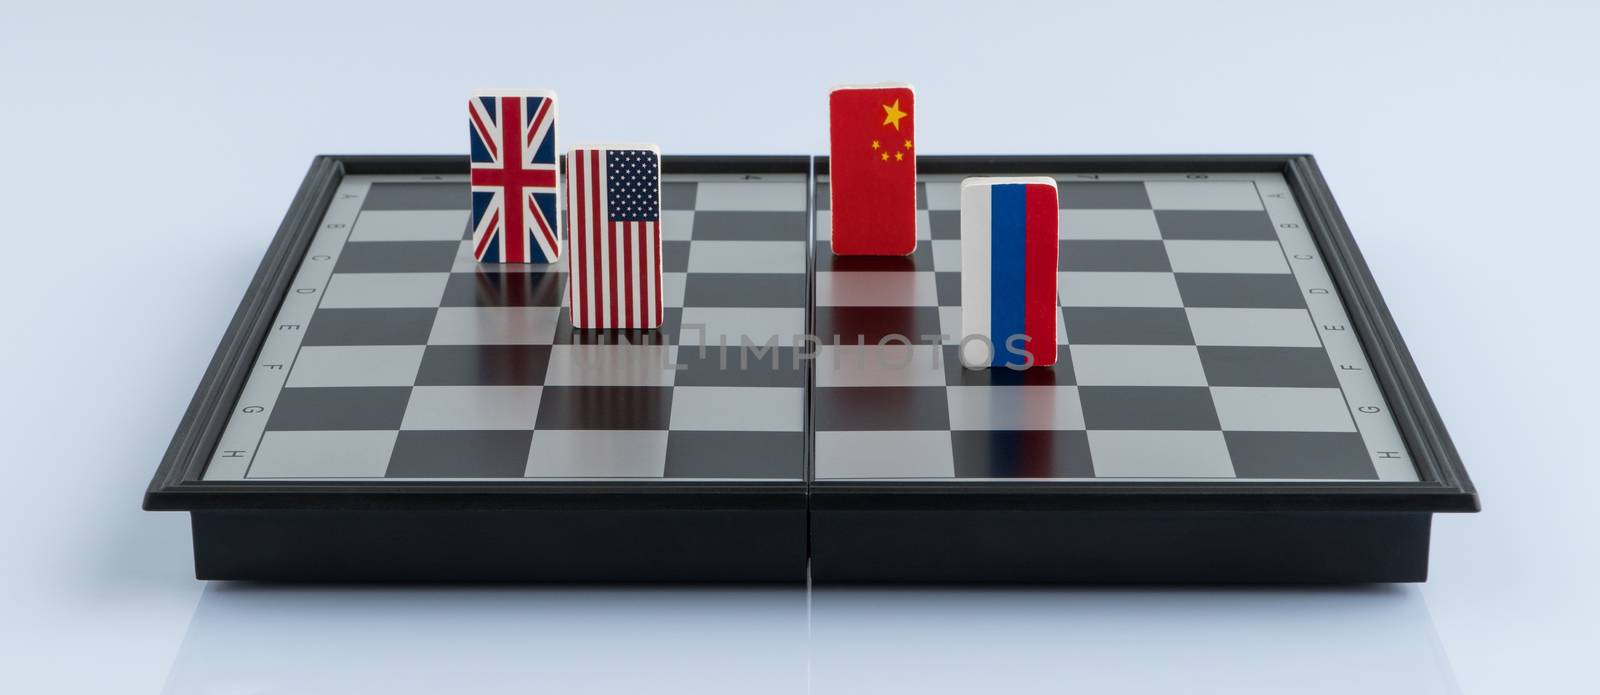 Symbols flag of Russia, USA, China and England on the chessboard. The concept of political game.